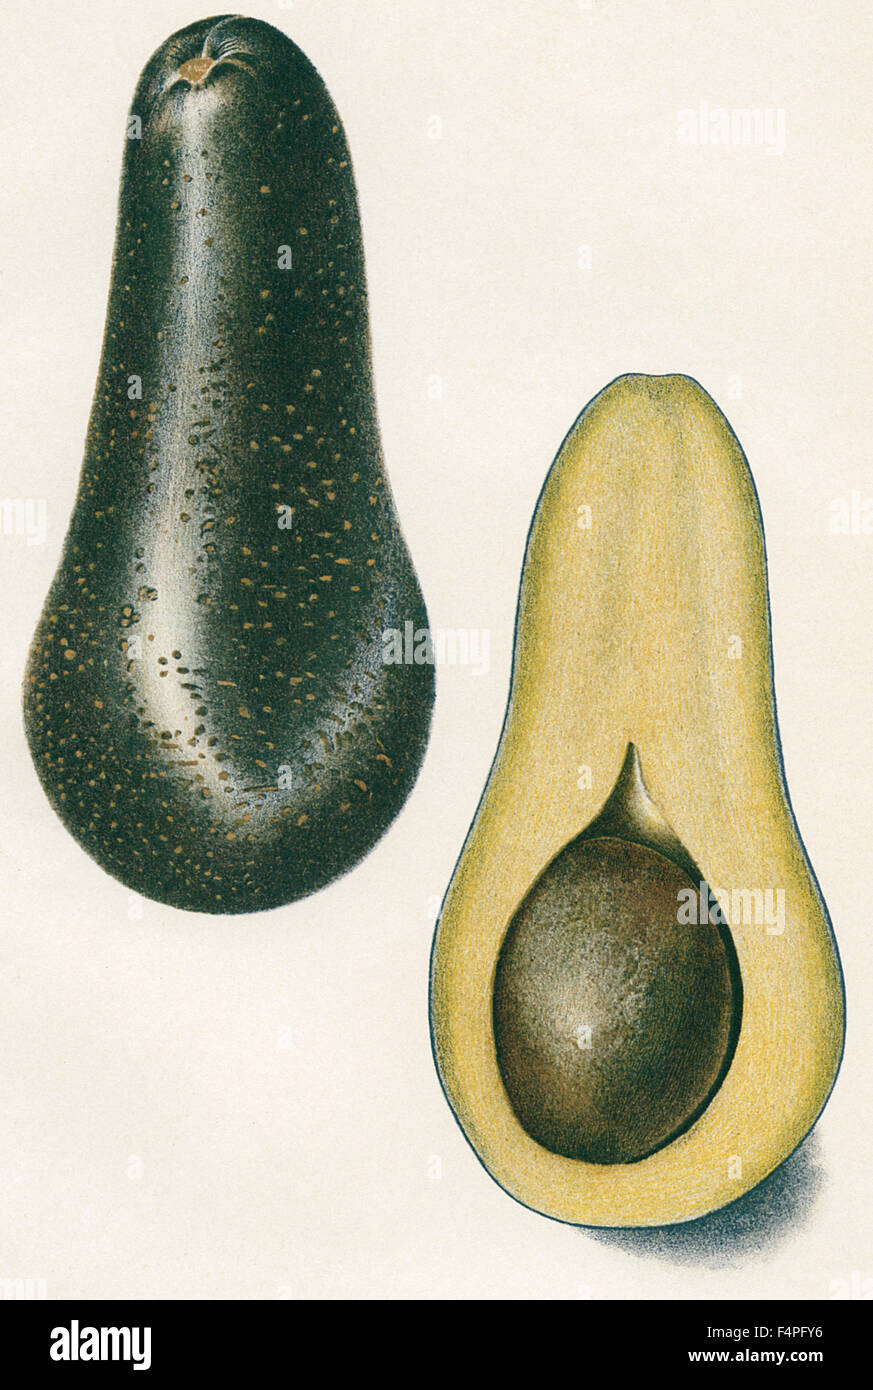 Chappelow Avocado, E. J. Schutt, Yearbook U.S. Department of Agriculture, Plate XXXI, 1906 Stock Photo